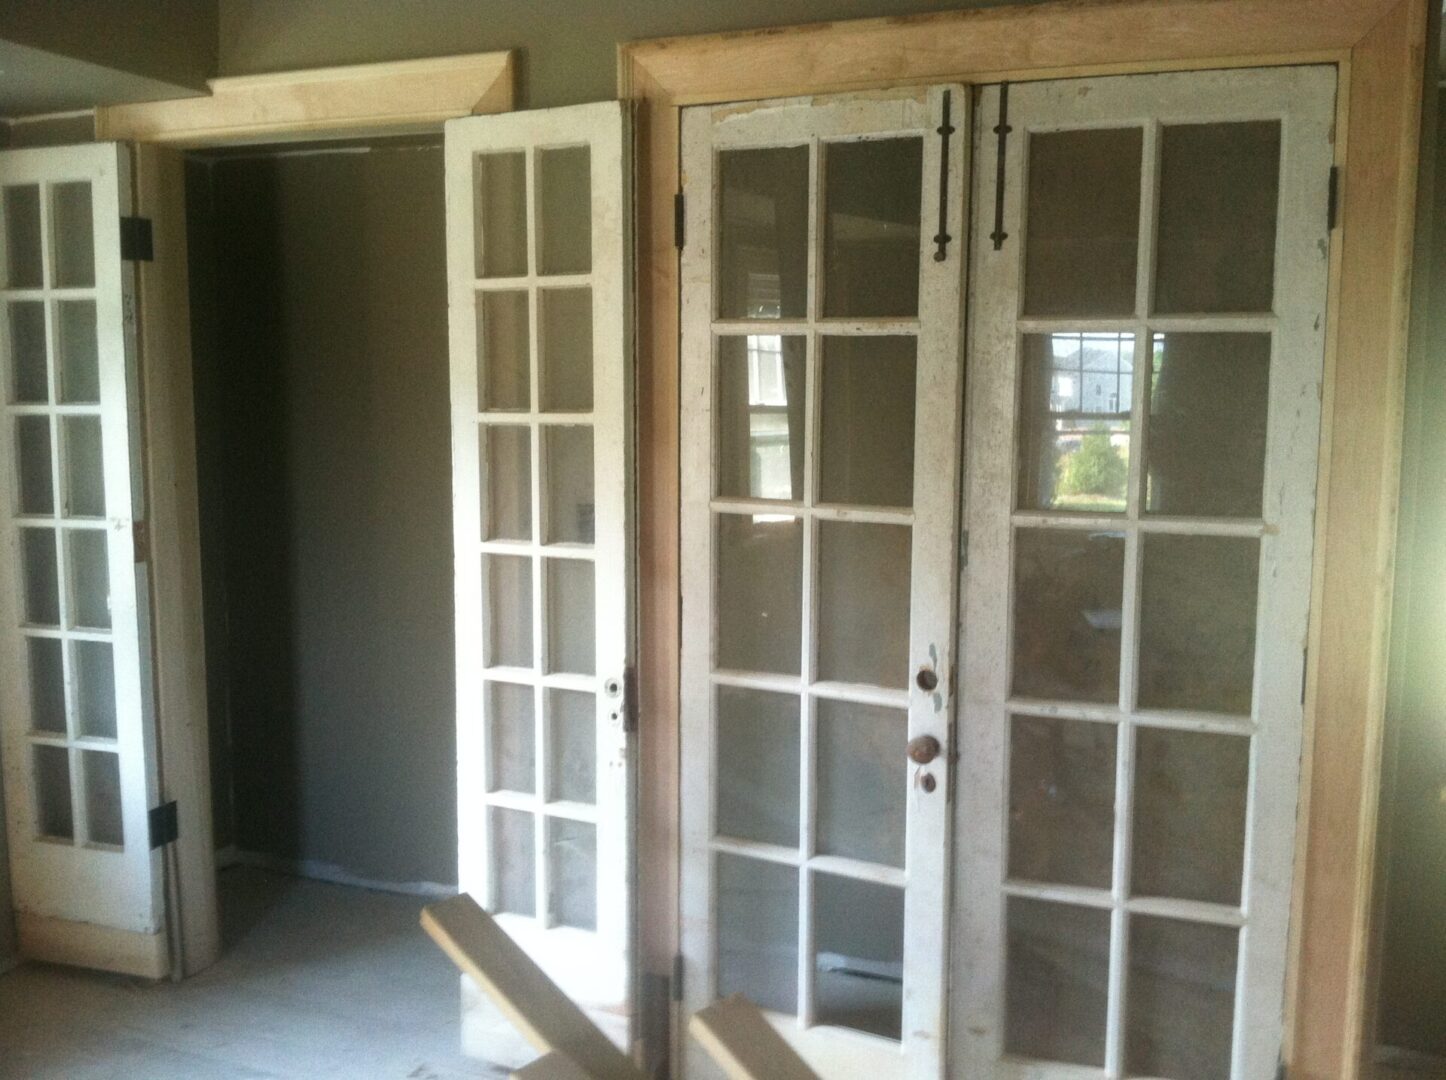 Two white wood double doors with window paneling on them